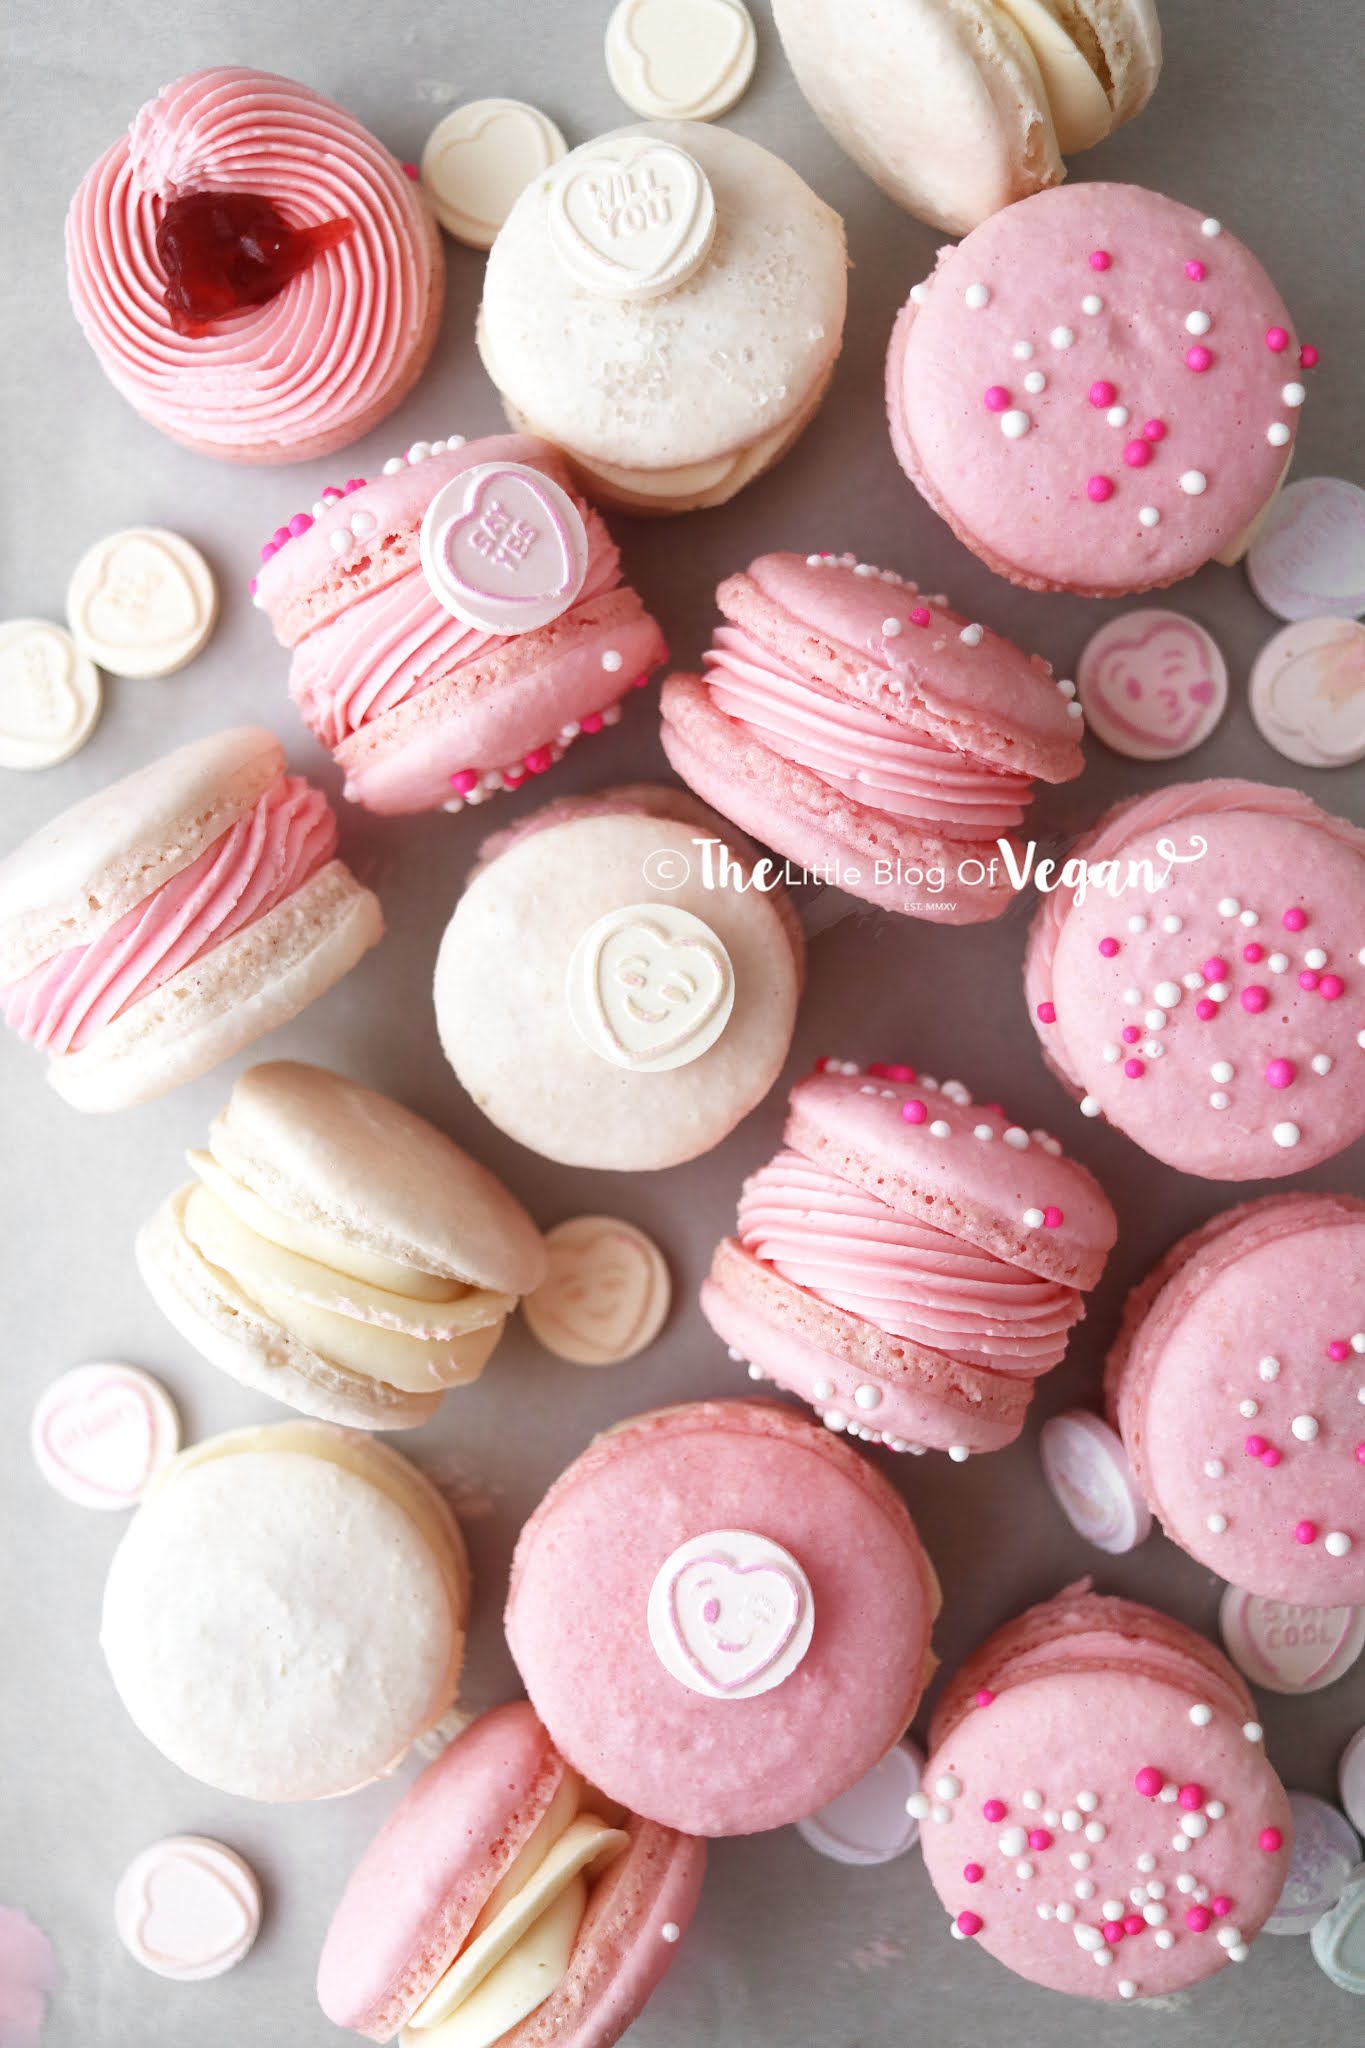 A plate of pink and white macarons with a heart on top. - Macarons